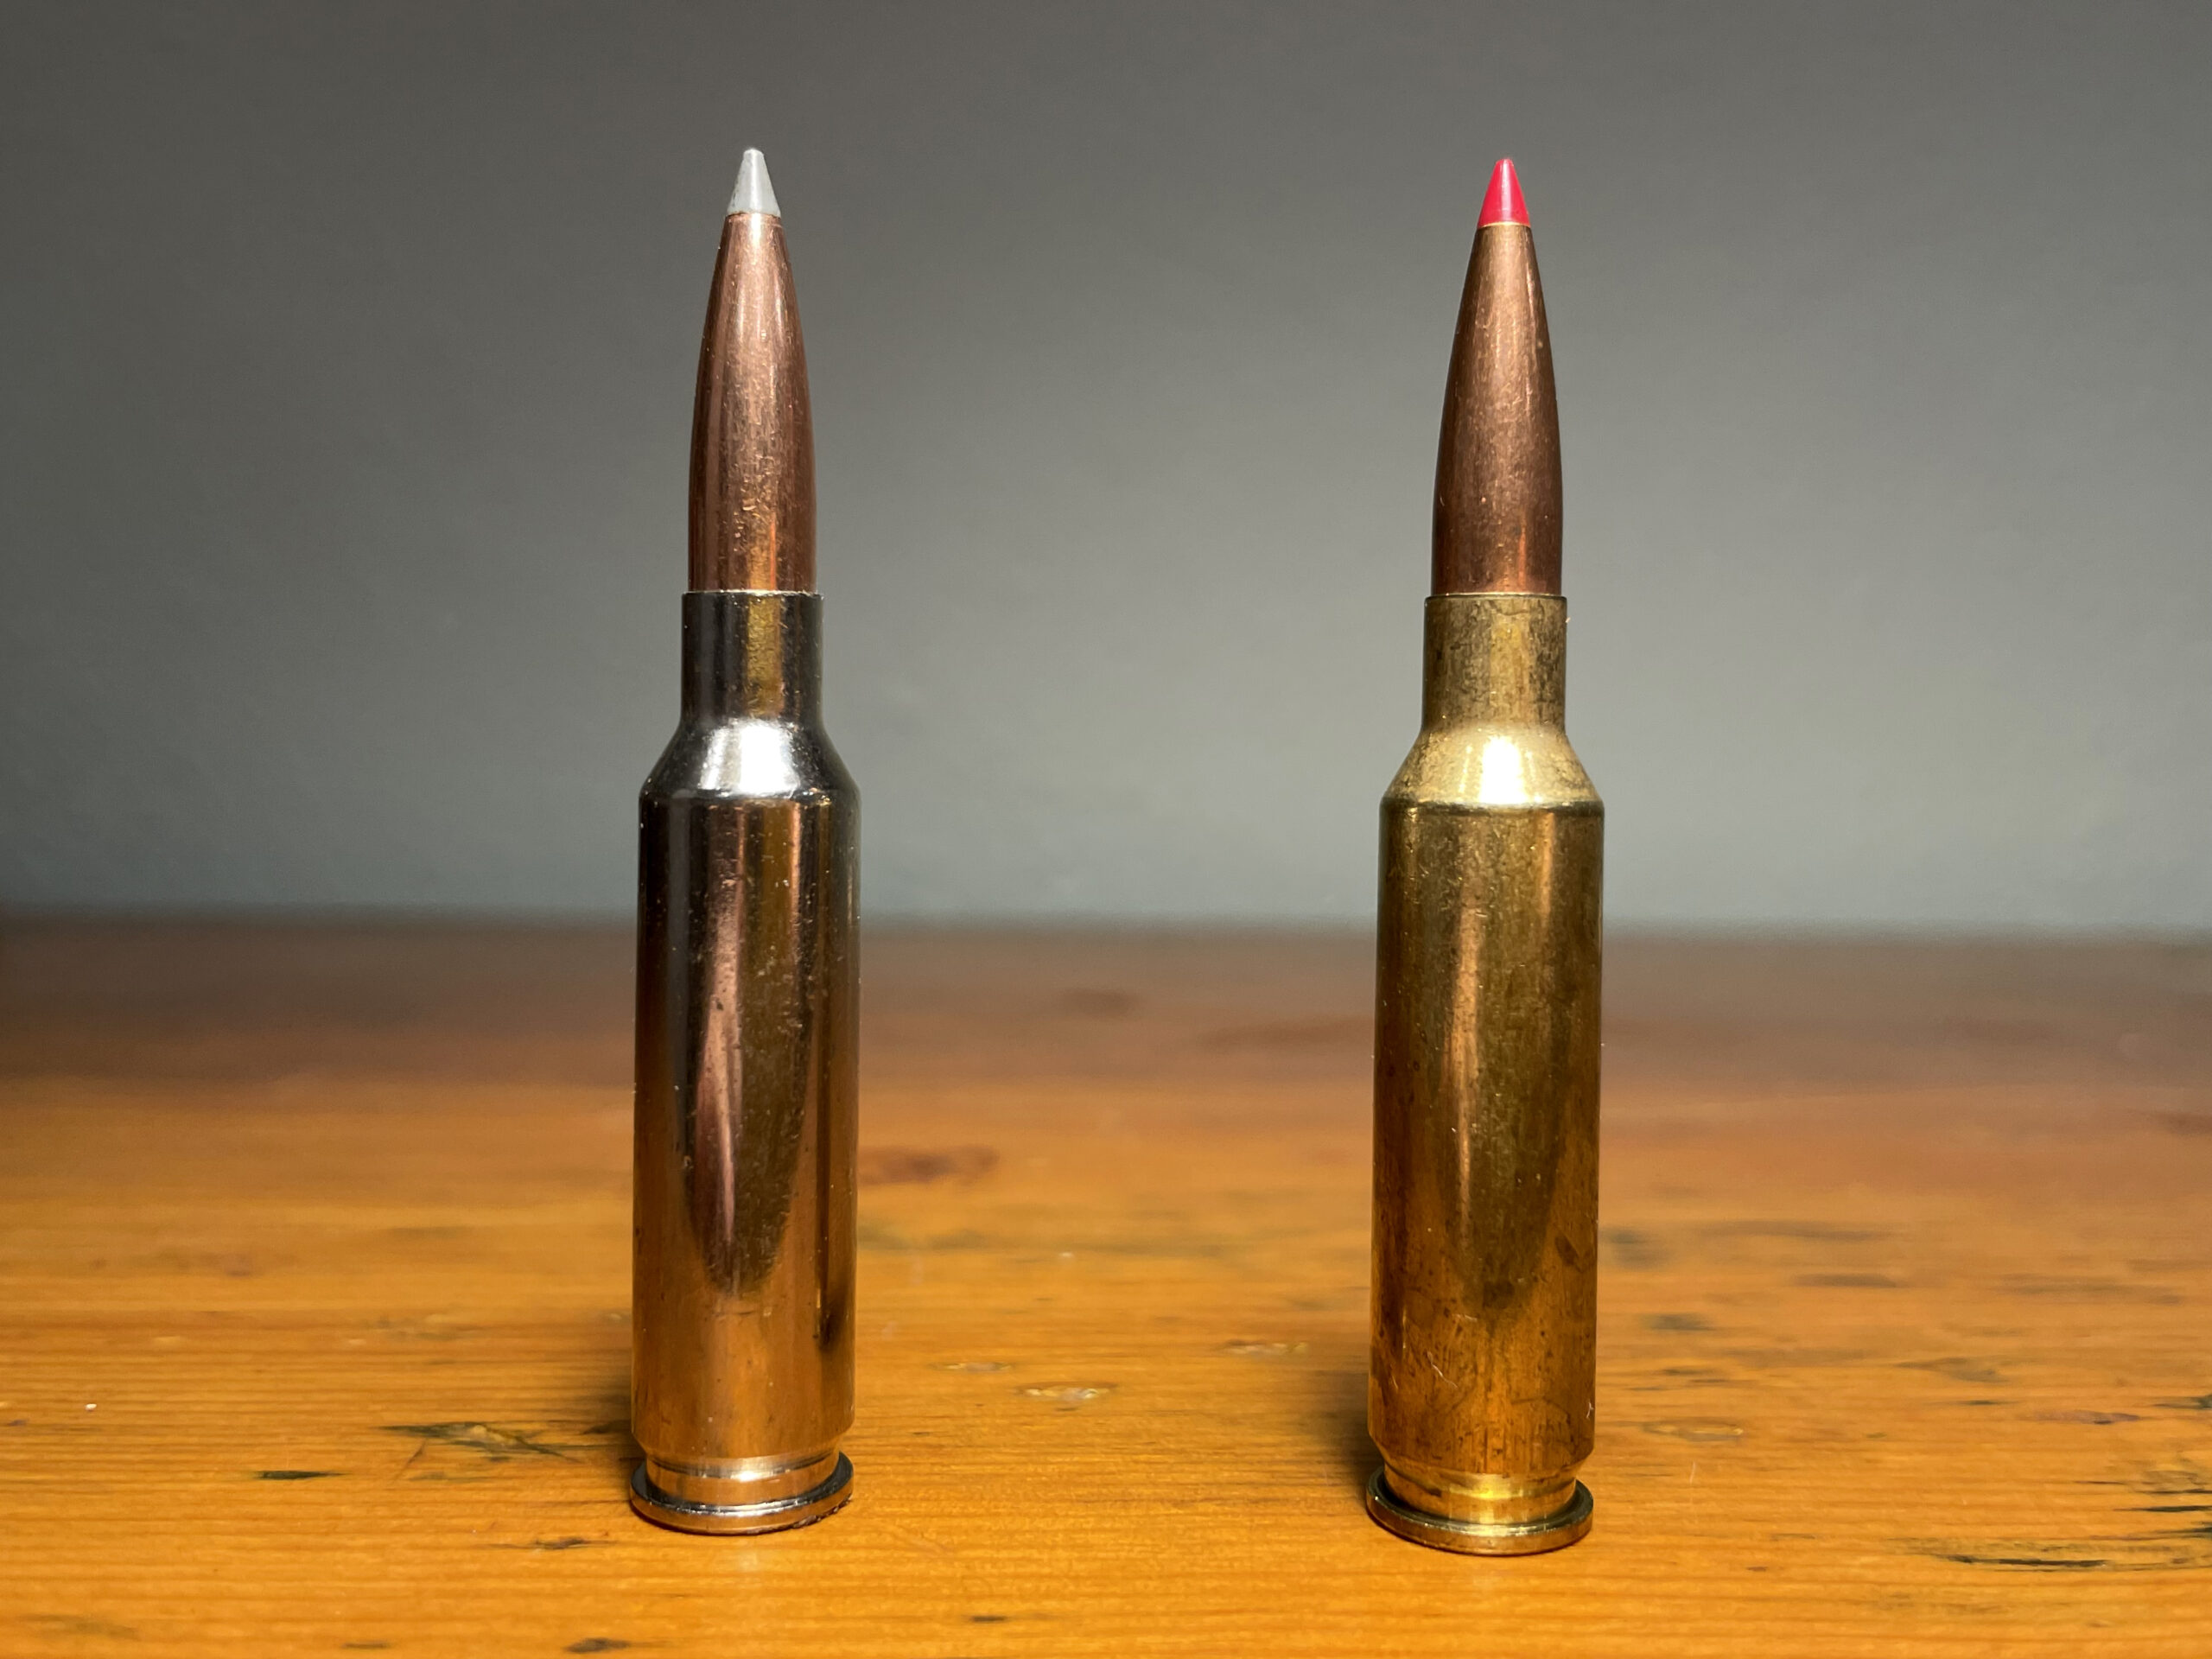 Two 6.5 Creedmoor cartriges.